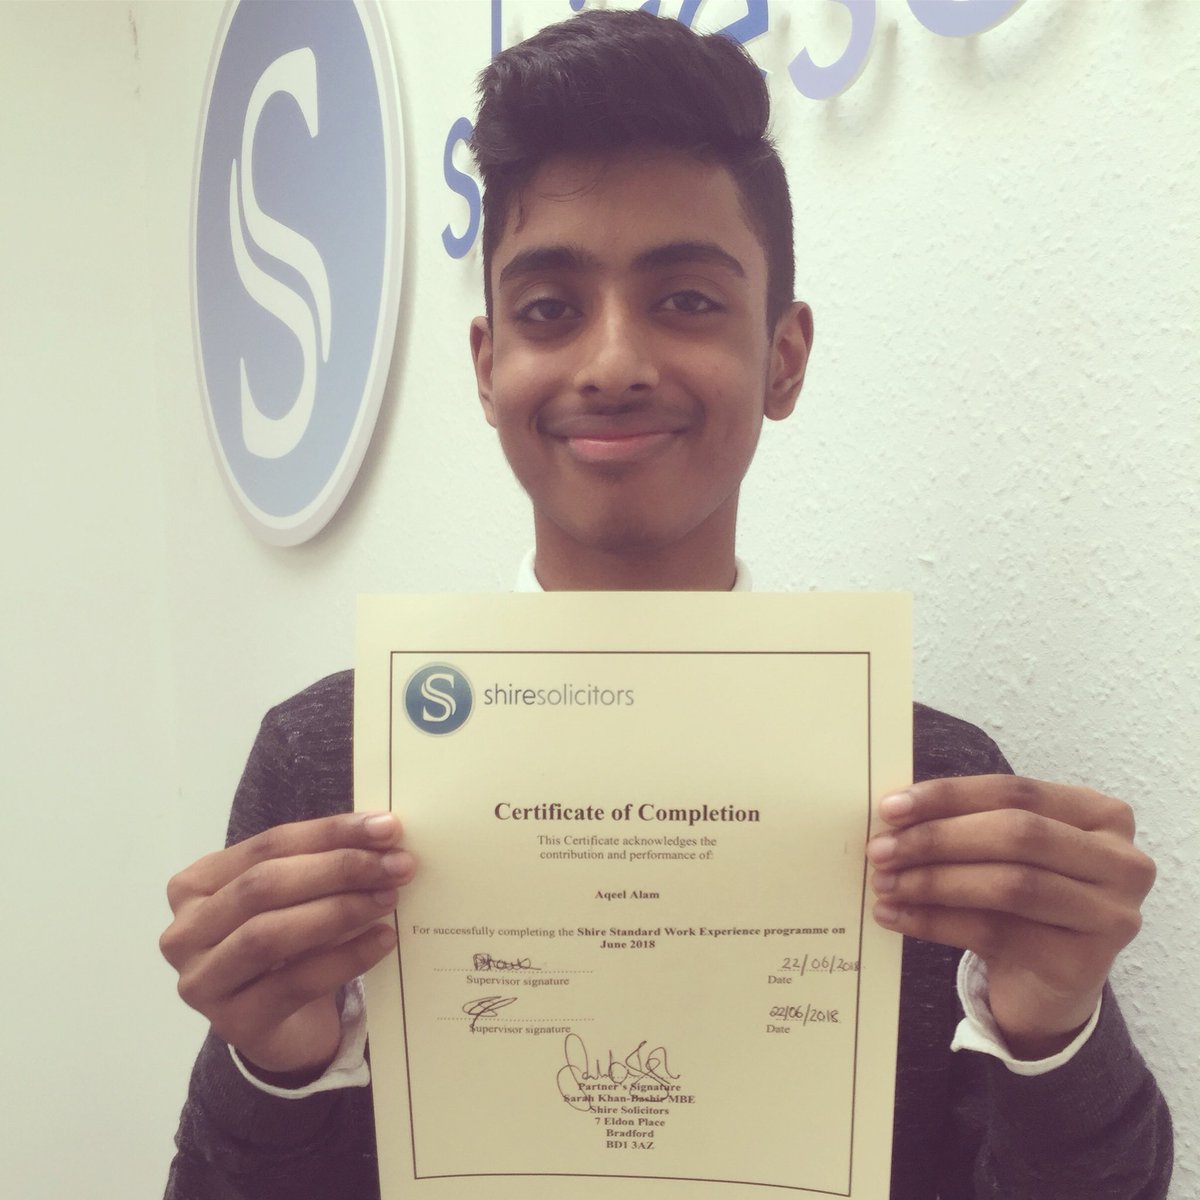 Well done to Aqeel who is officially  #SHIREstandard accredited- 👍🏻🏆 #notjustalawfirm #workexperiencethatmatters #workingwithschools #guidanceandsupport #businessawareness #legaltraining #placement #law #lawfirm #mocktrial #bradford #london #fivestars #legalservices #lawyers